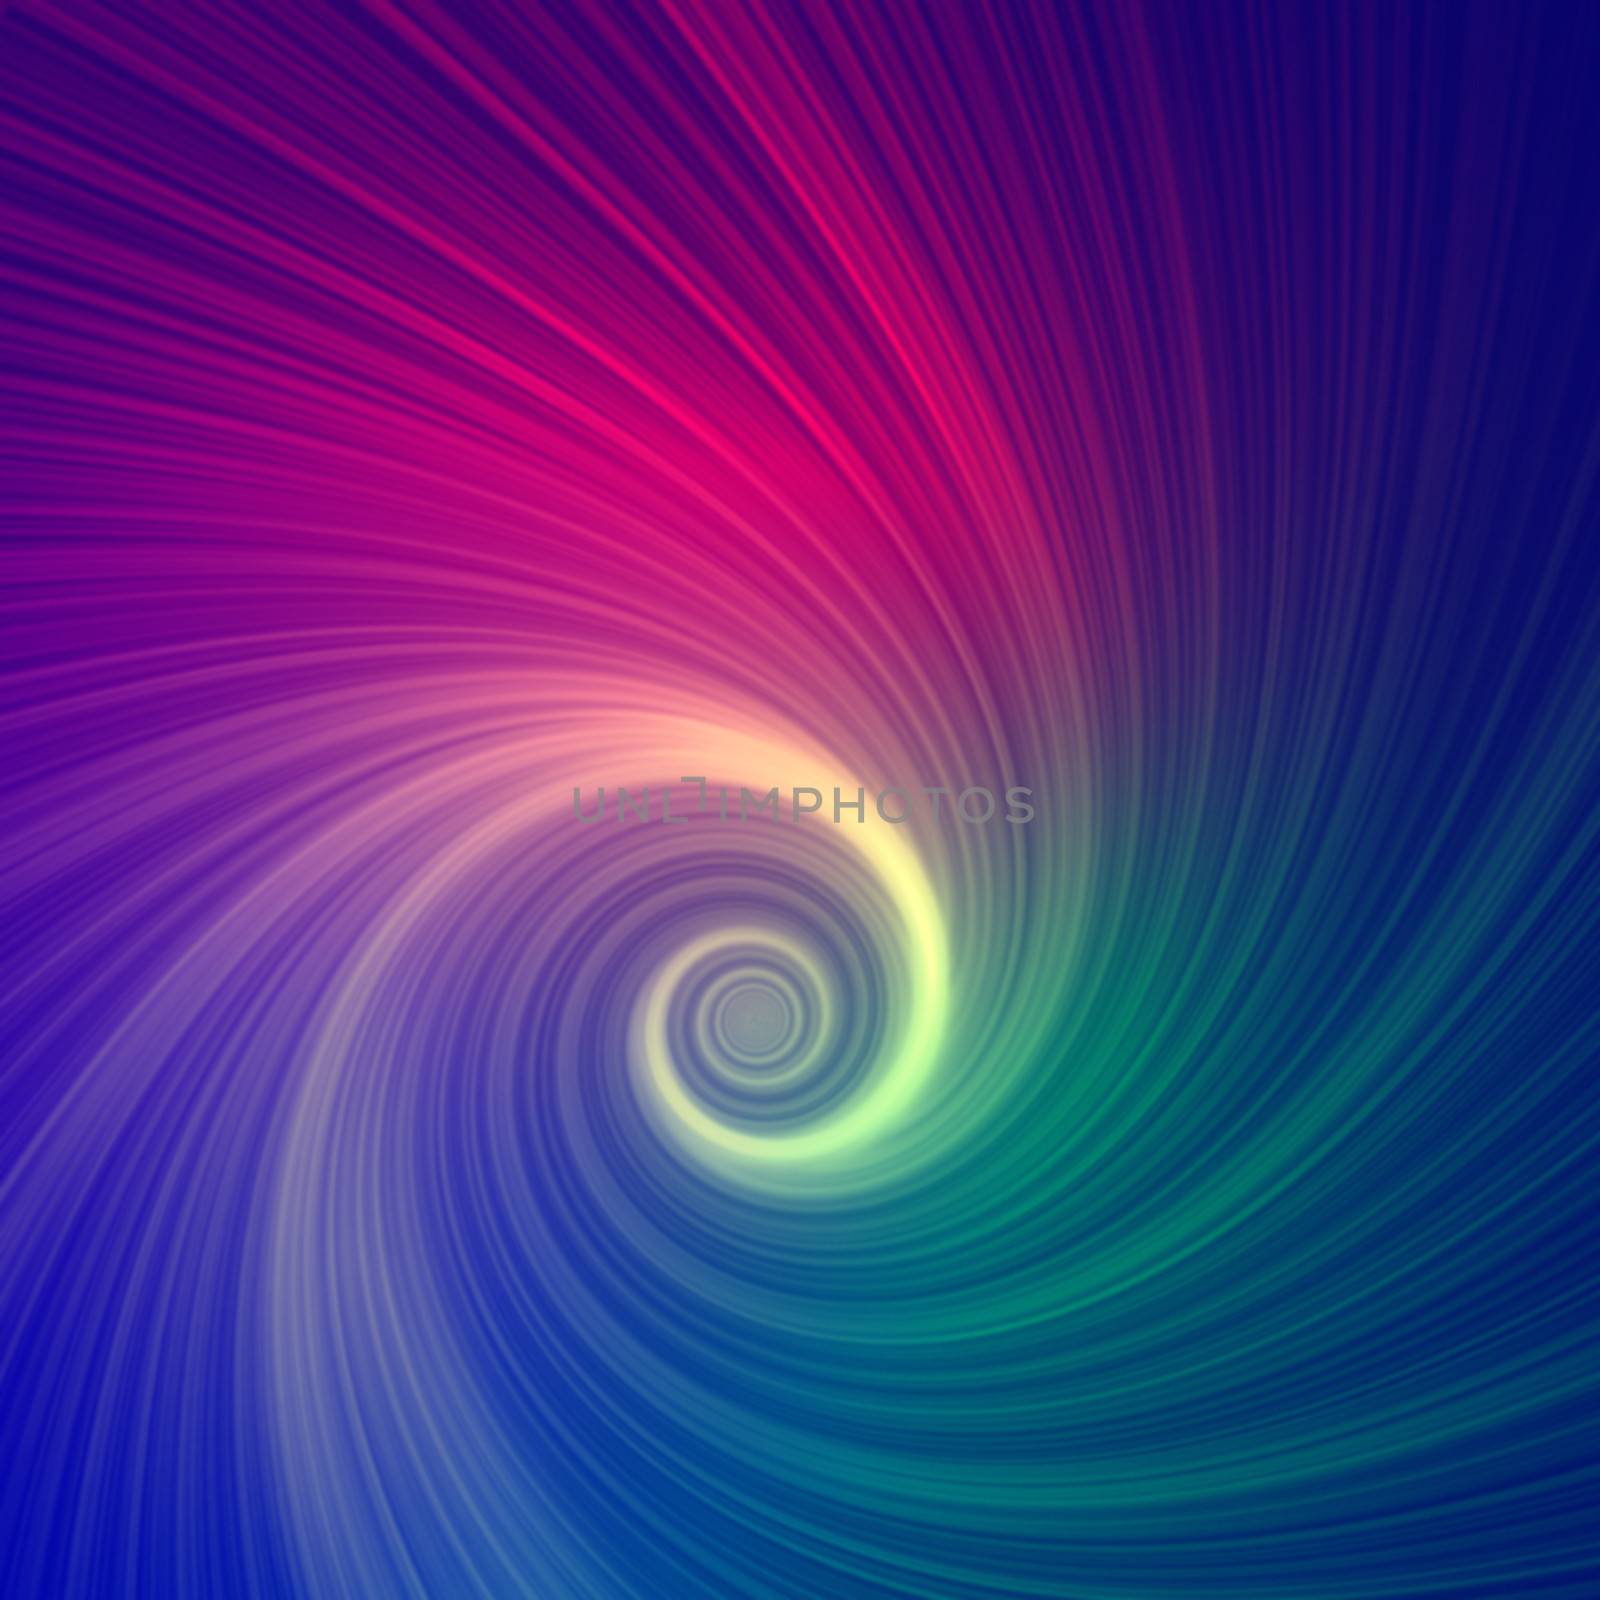 Abstract color spiral over dark background